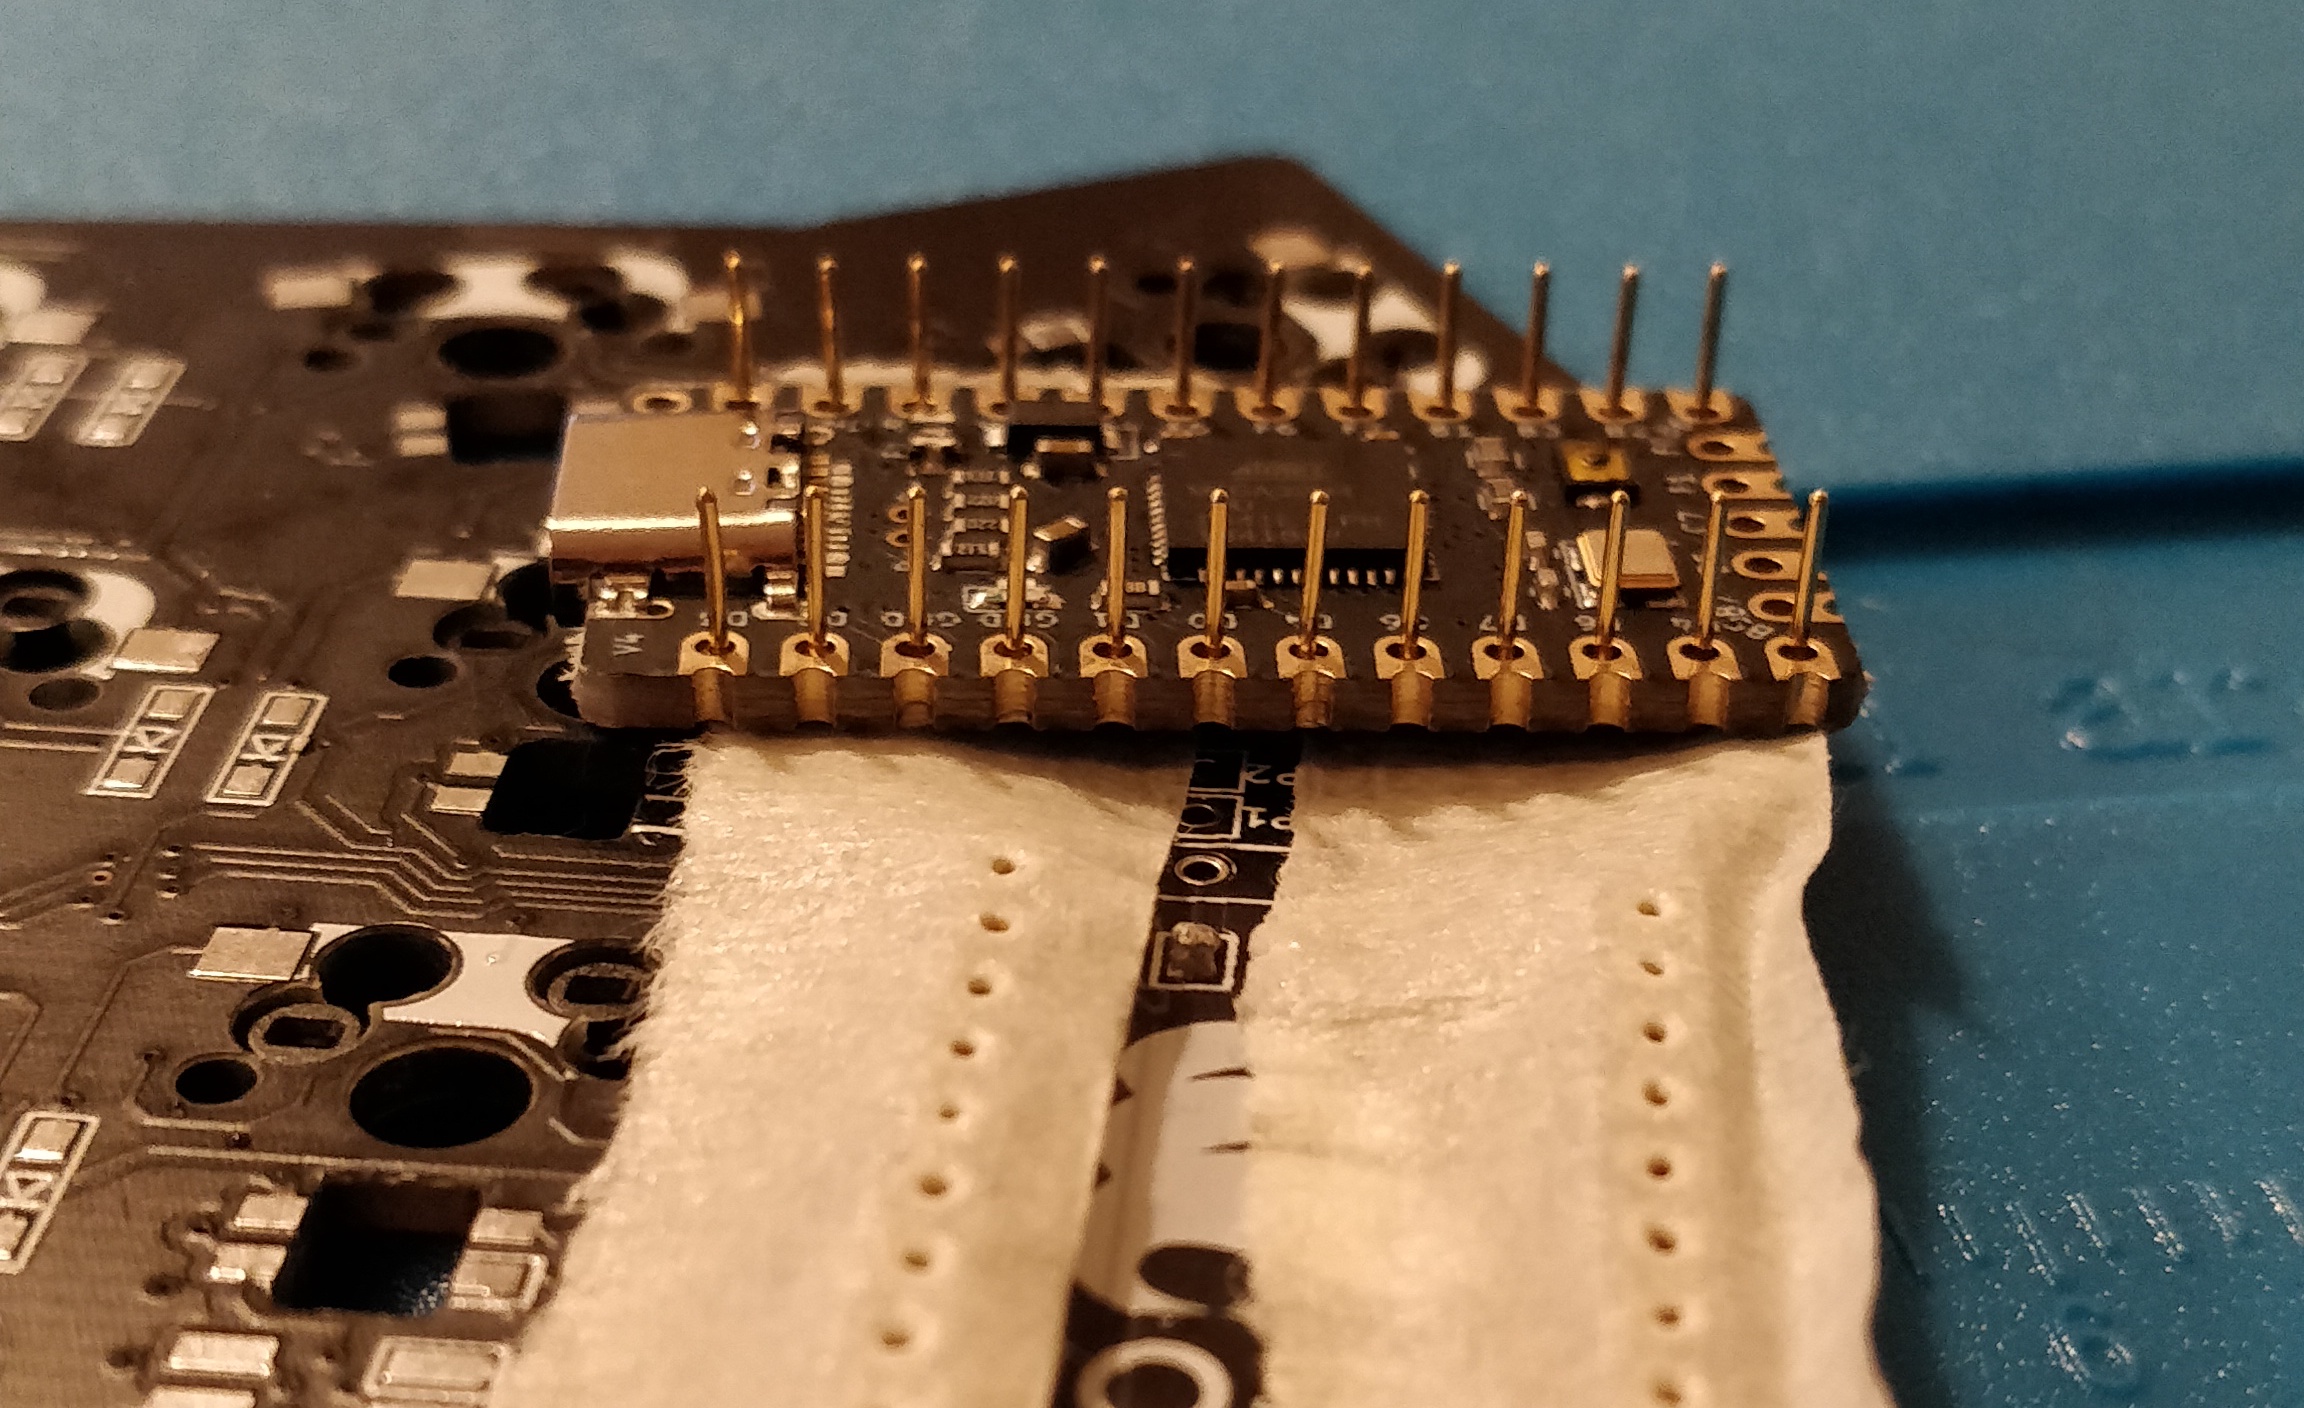 step 11 - corne crkbd - carefully remove microcontroller now with soldered pins